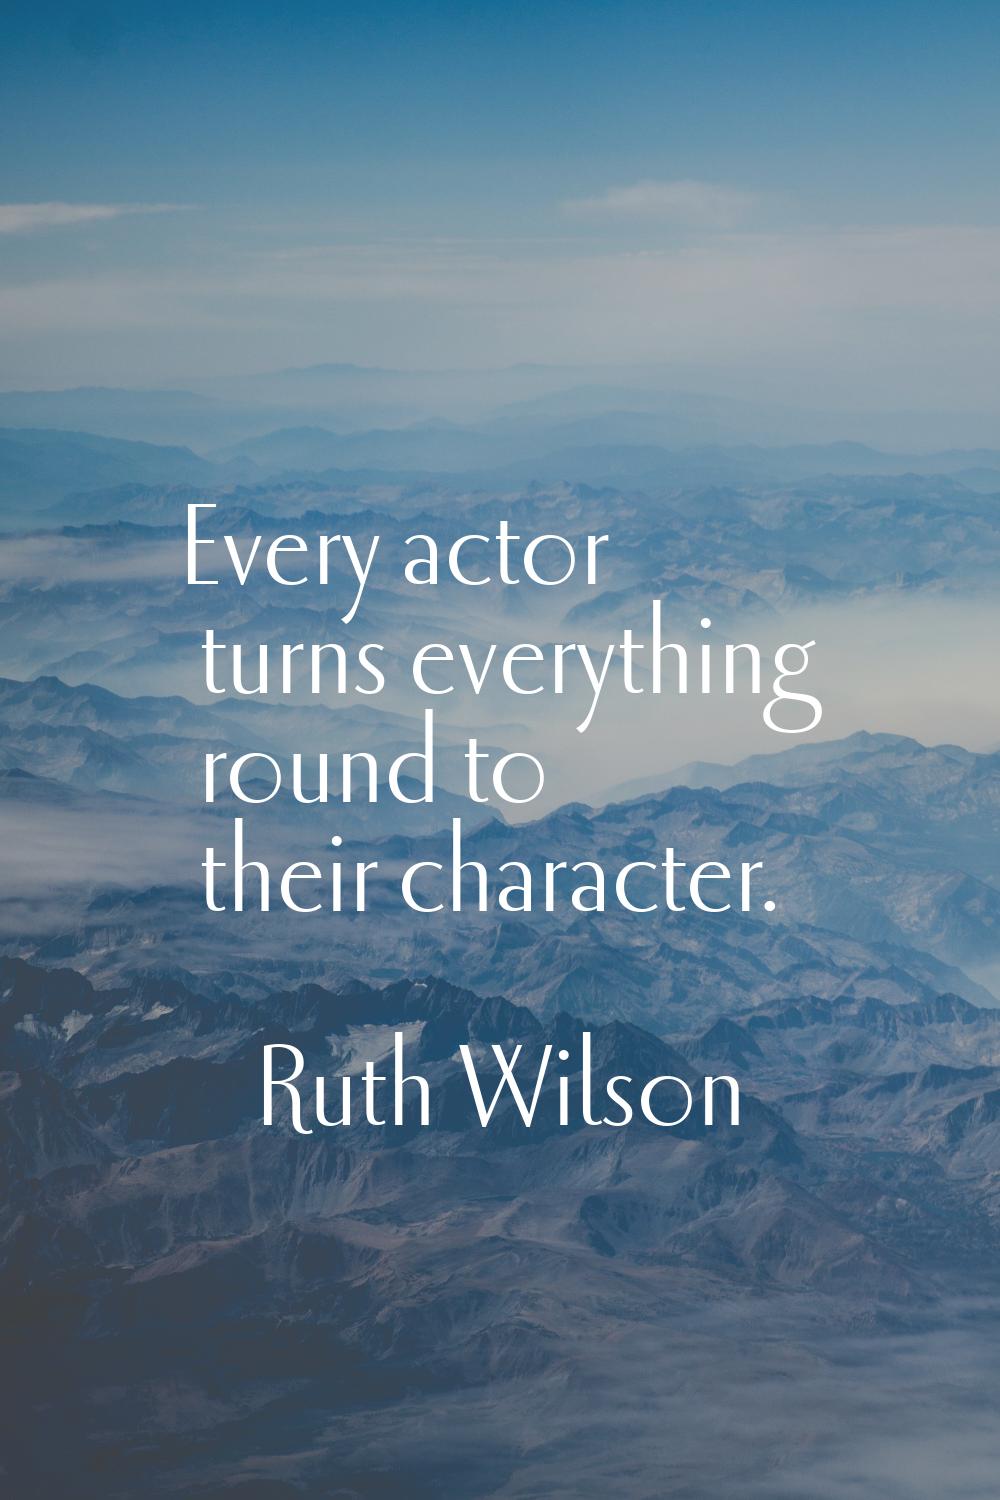 Every actor turns everything round to their character.